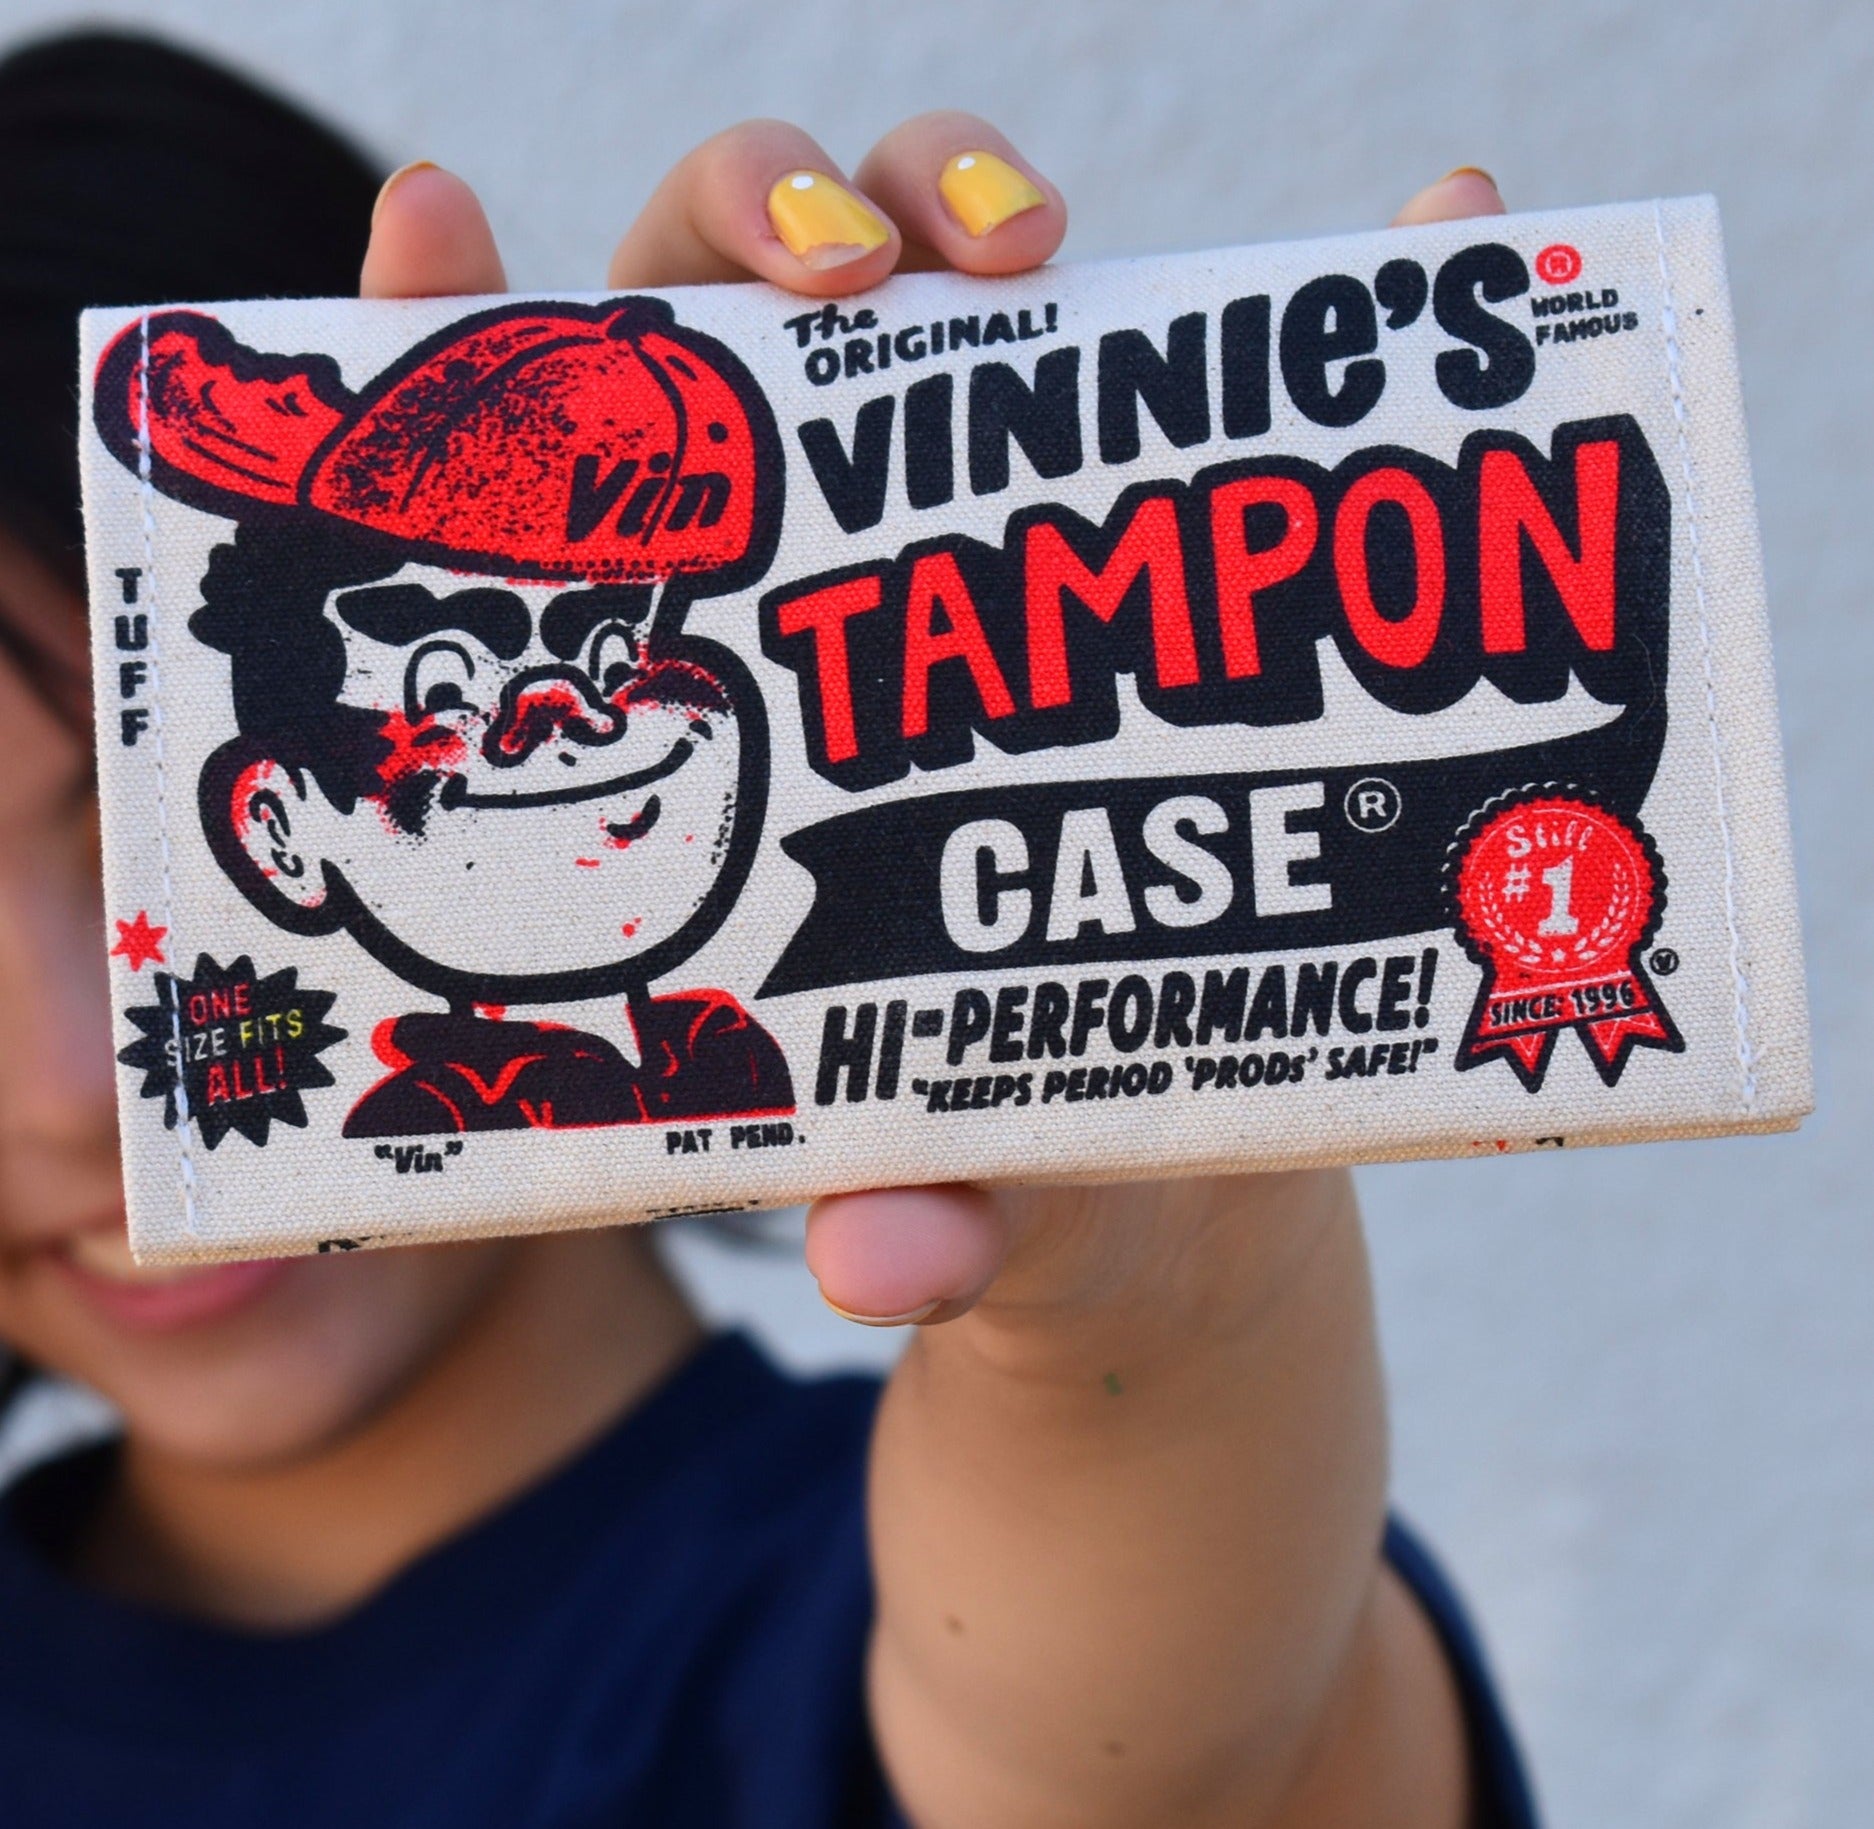 The #1 TAMPON CASE in the WHOLE FLIPPIN' WORLD!